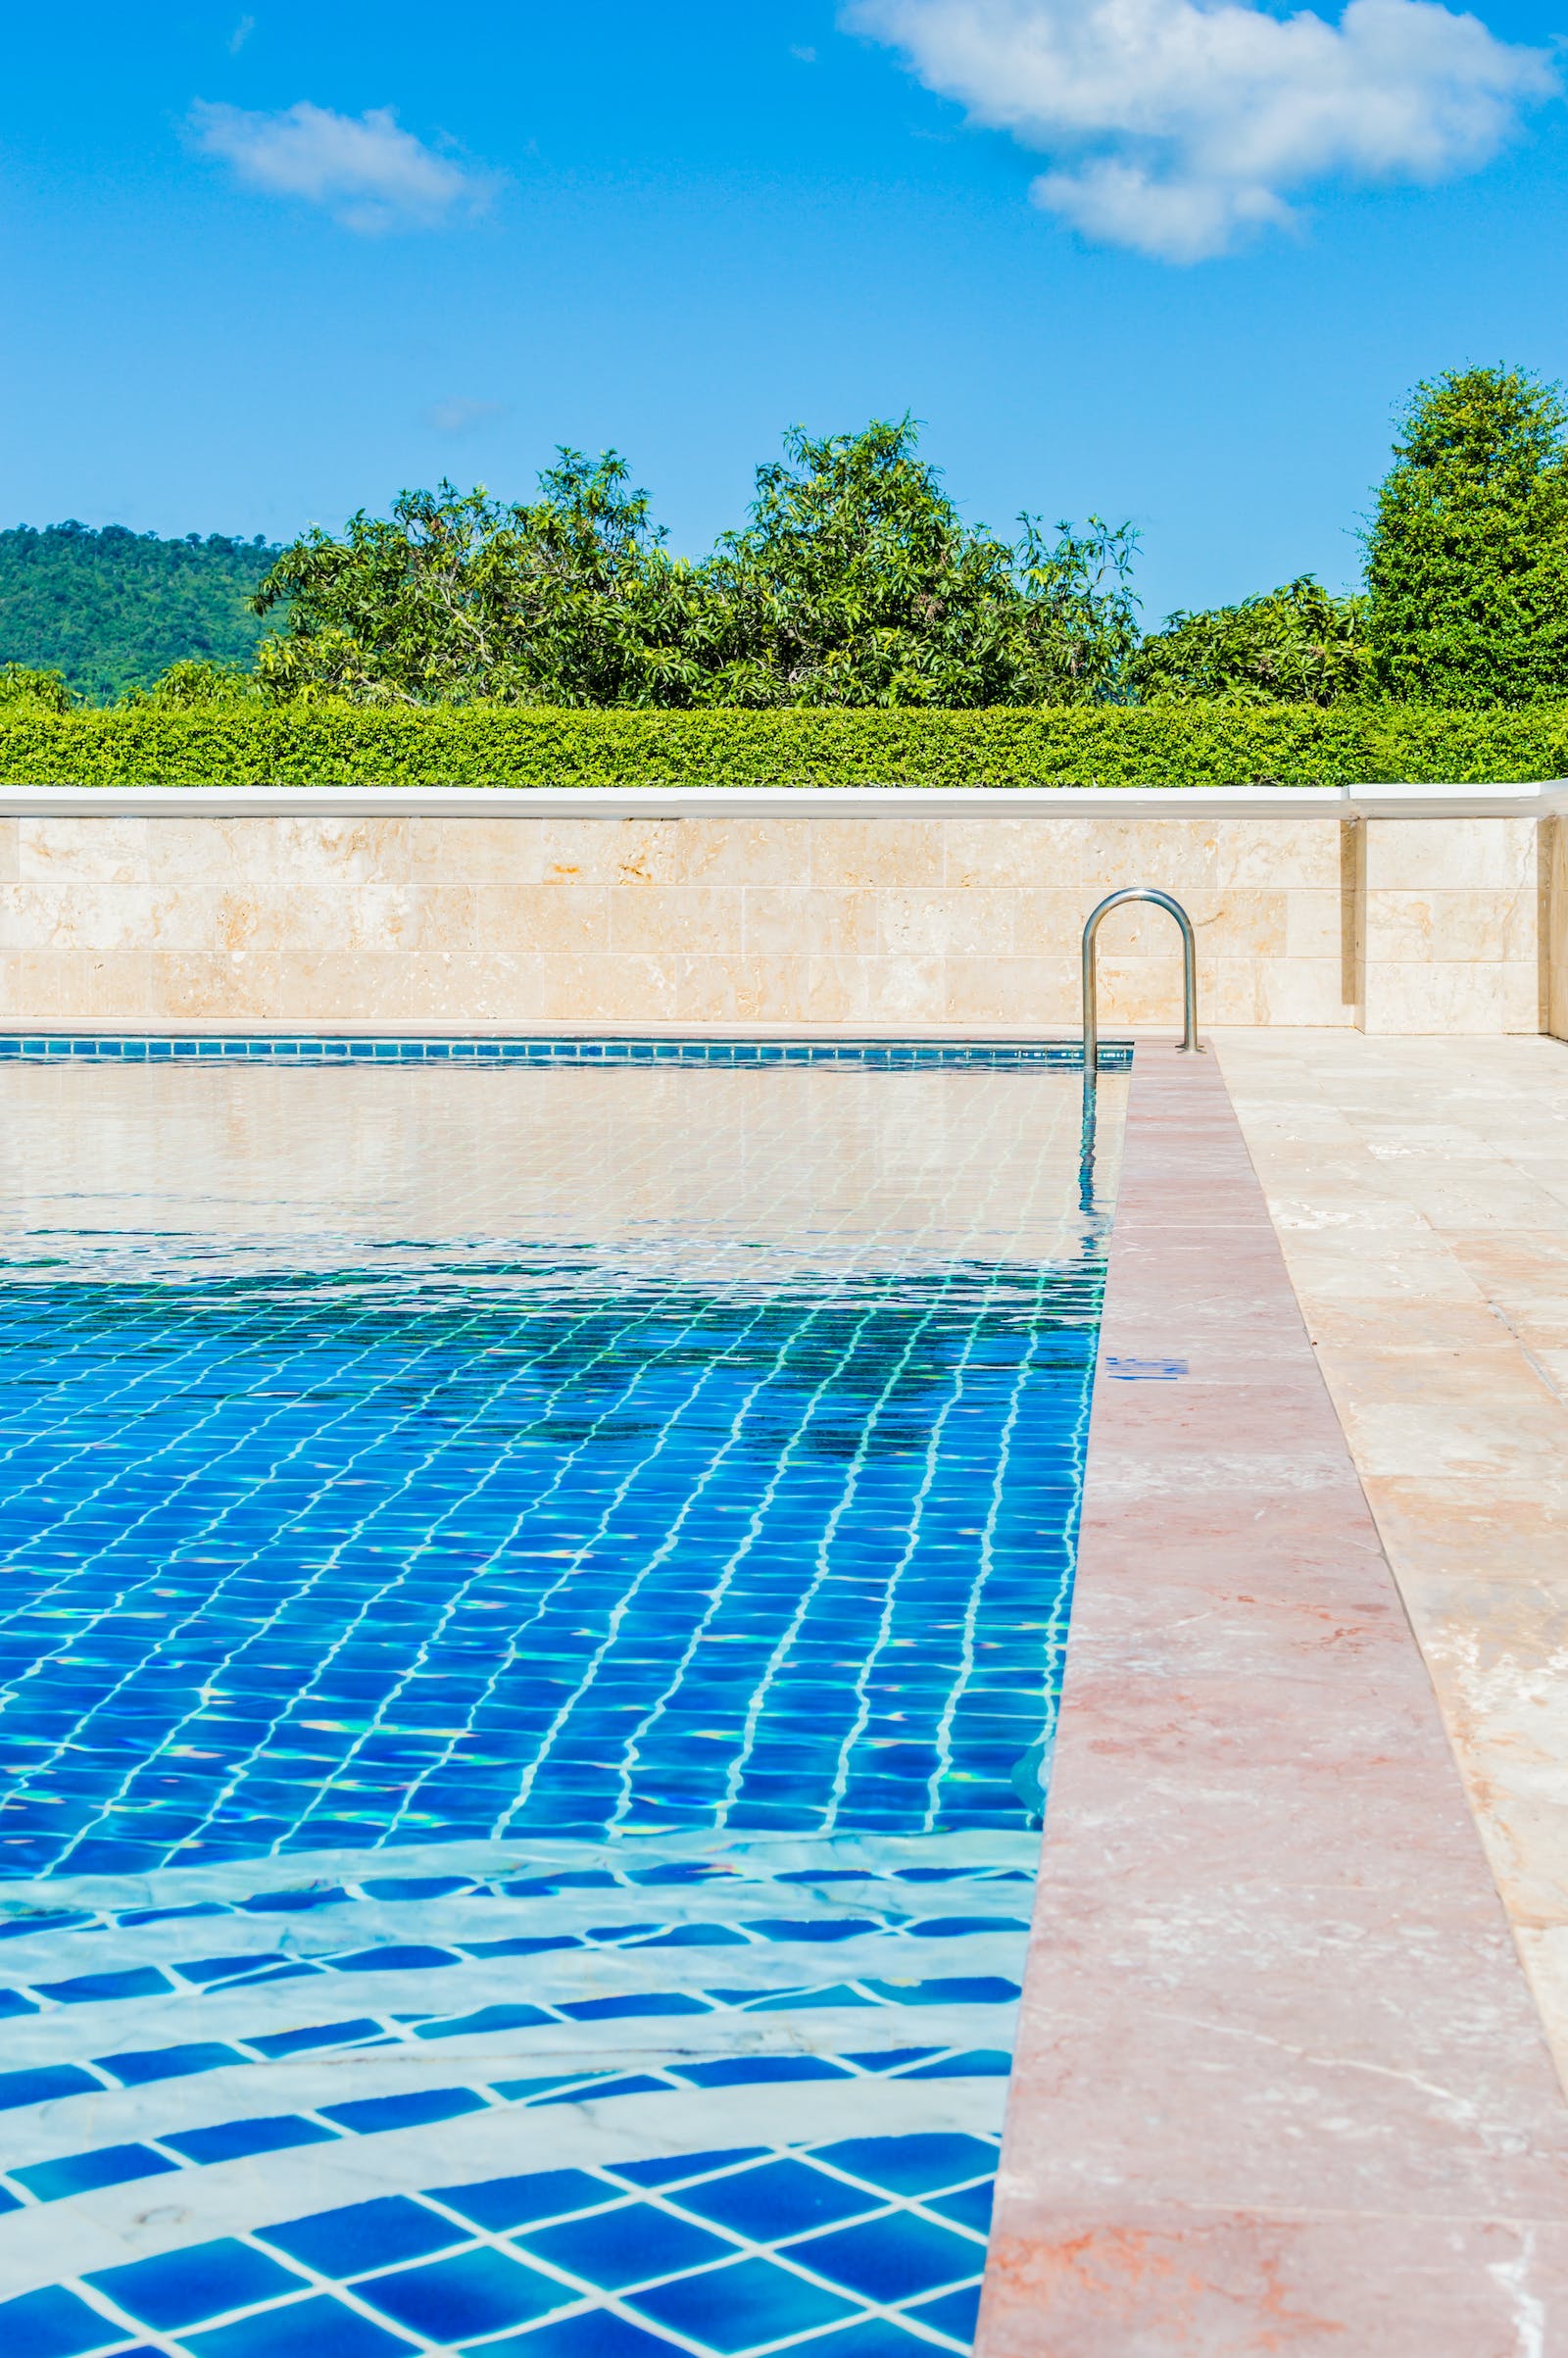 The Value of Adding a Swimming Pool to My Property?